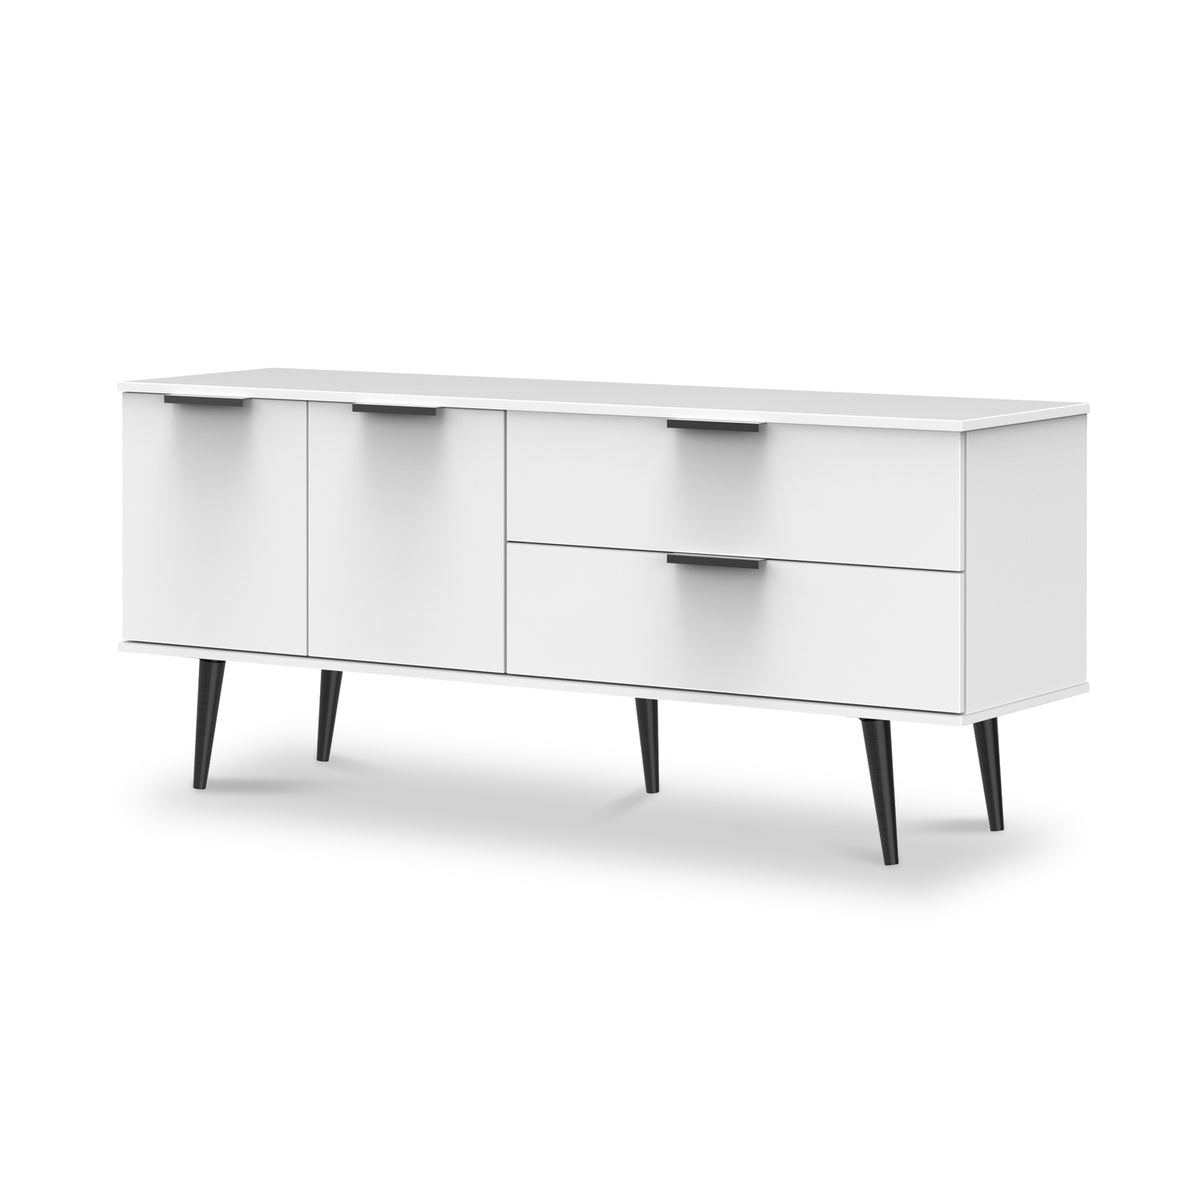 Asher White 2 Drawer 2 Door Wide Sideboard from Roseland Furniture